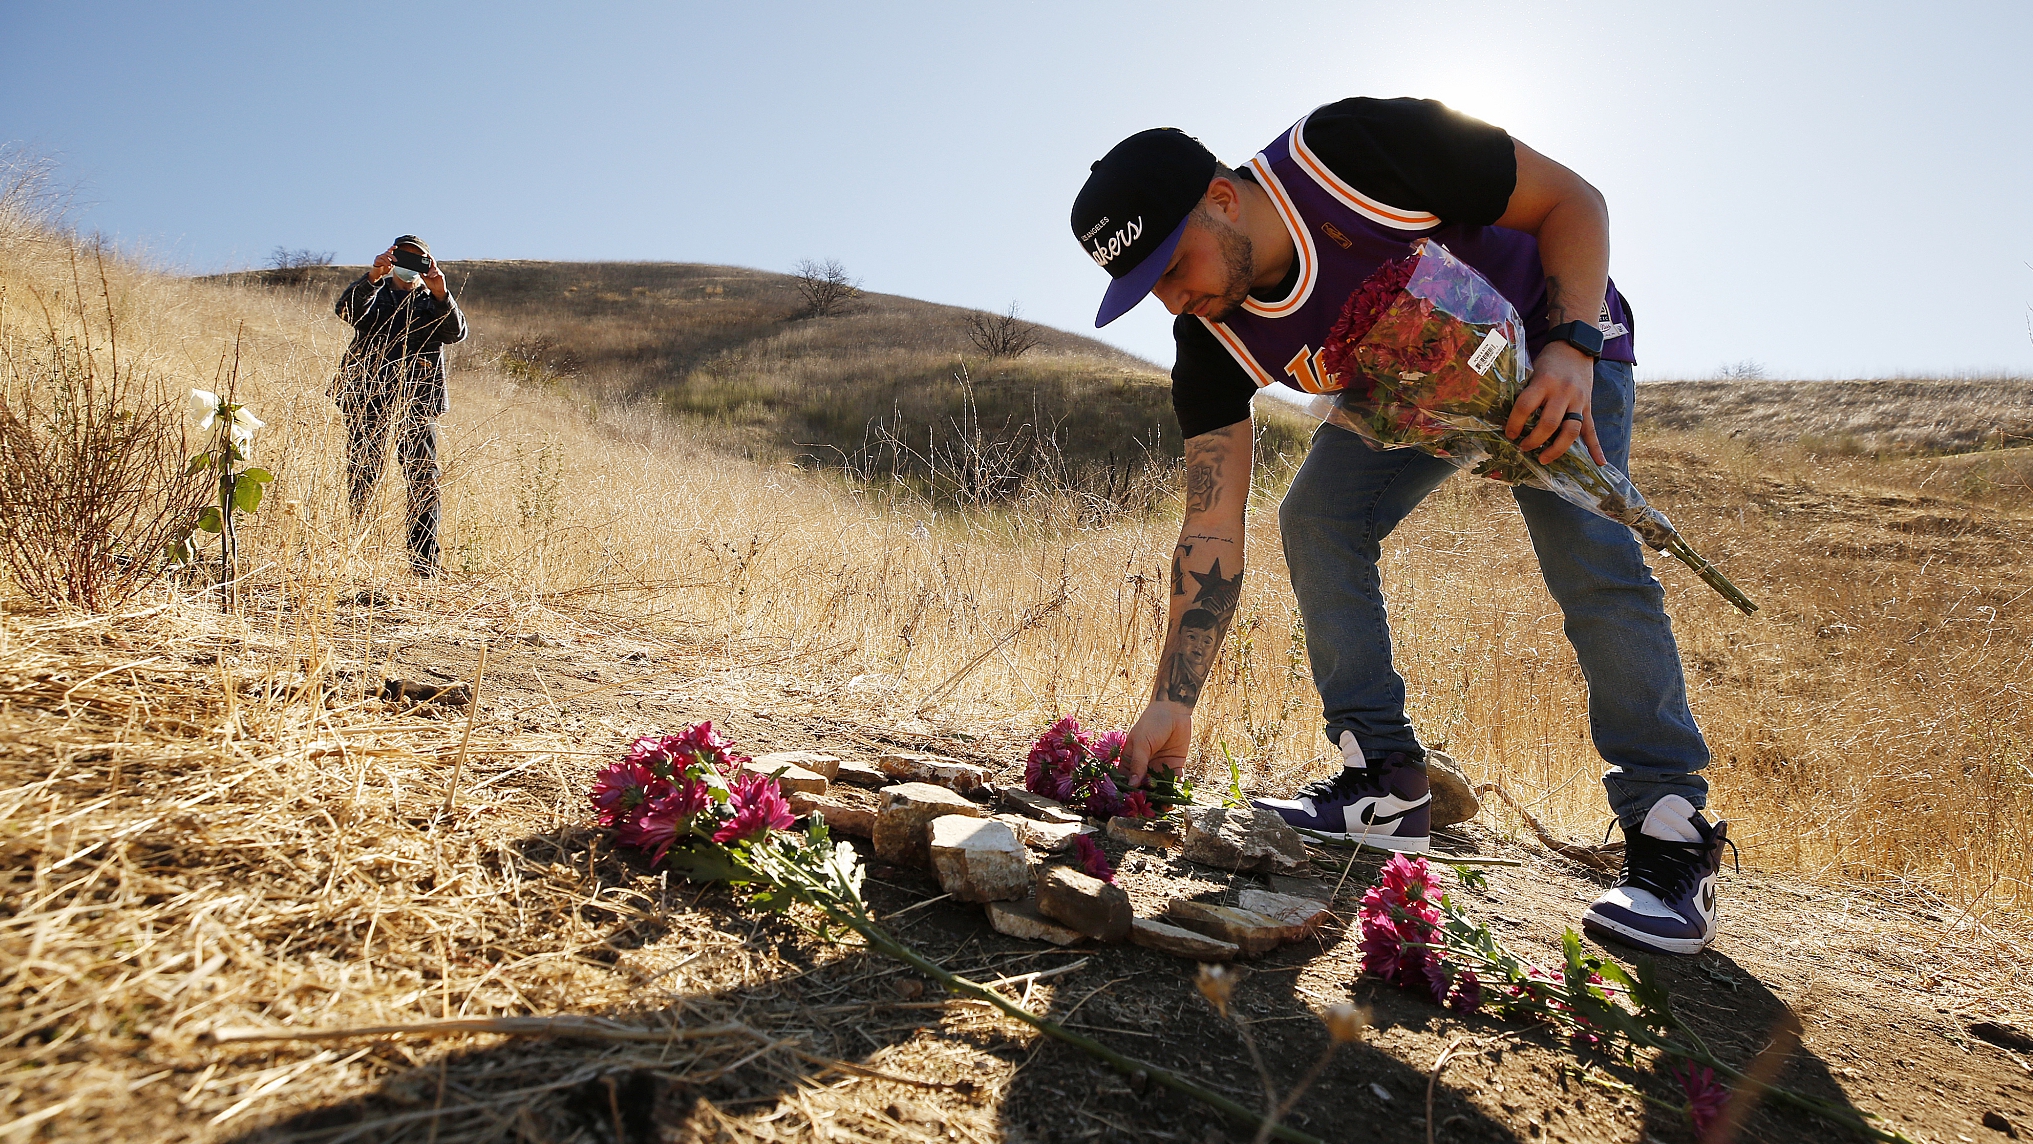 Kobe Bryant fans express enduring disbelief as they mourn anniversary of  his death